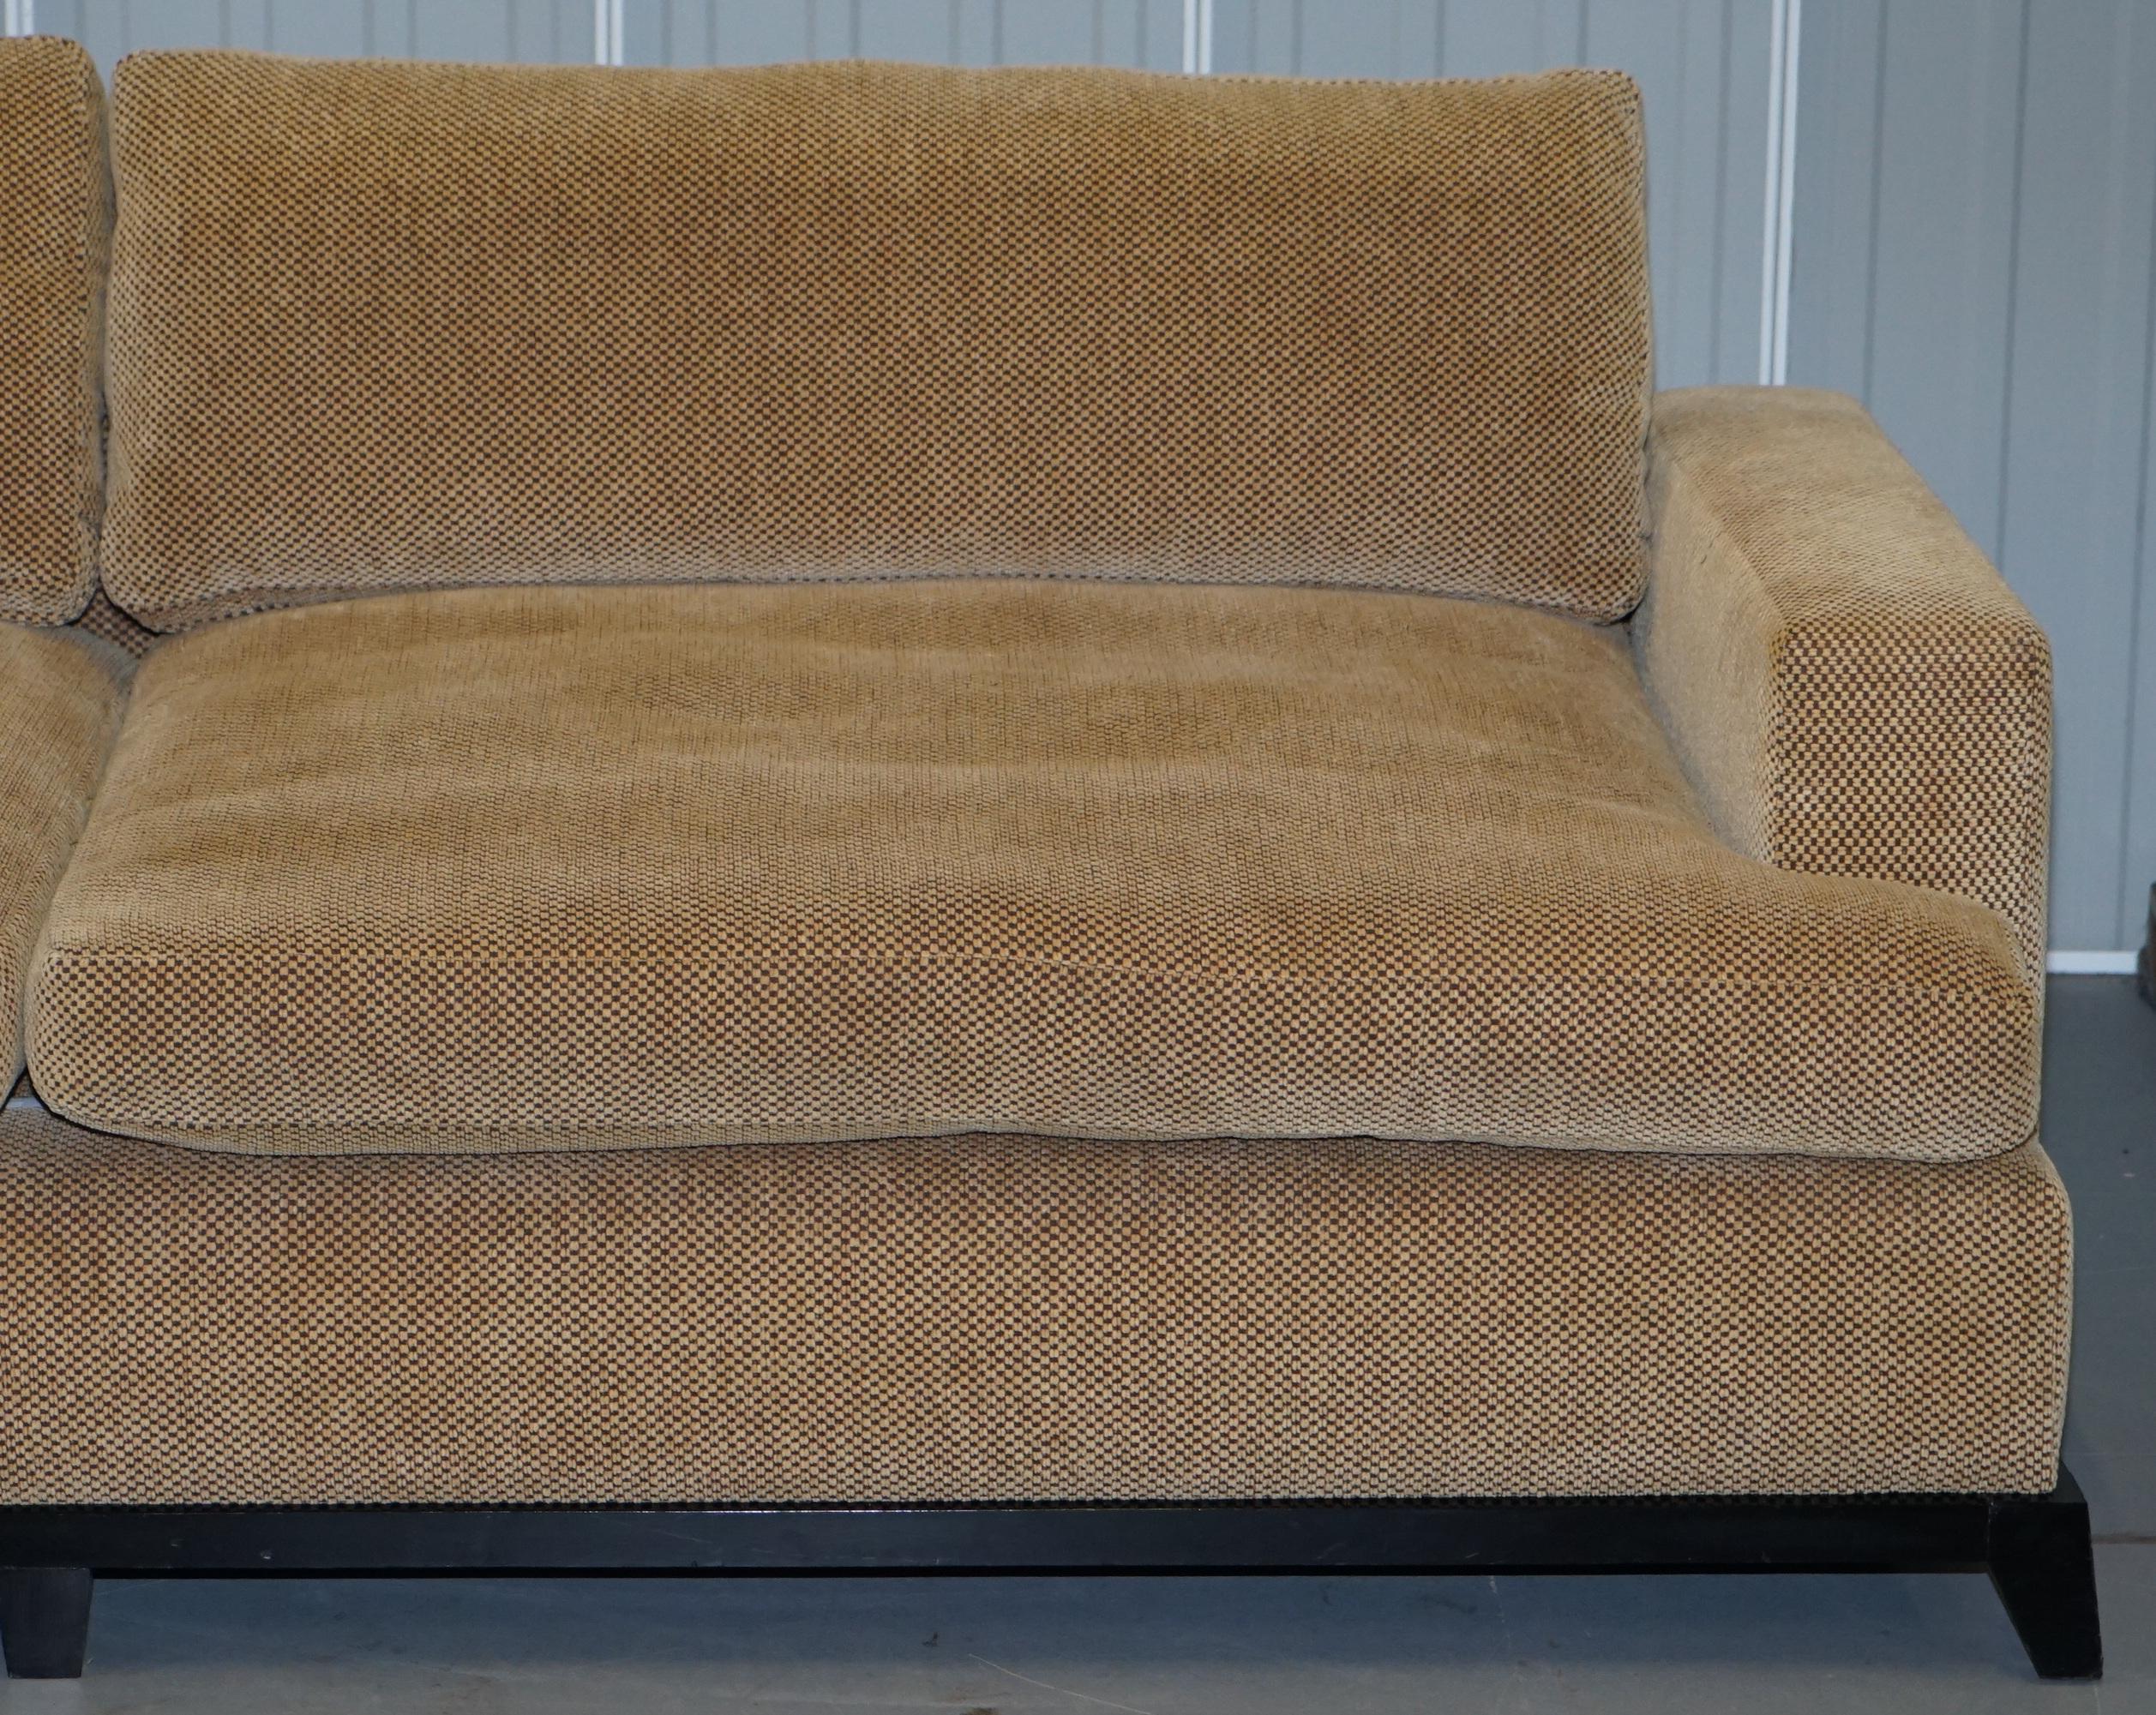 English 1 of 2 George Smith Signature Square Arm Sofa Feather Filled Cushions